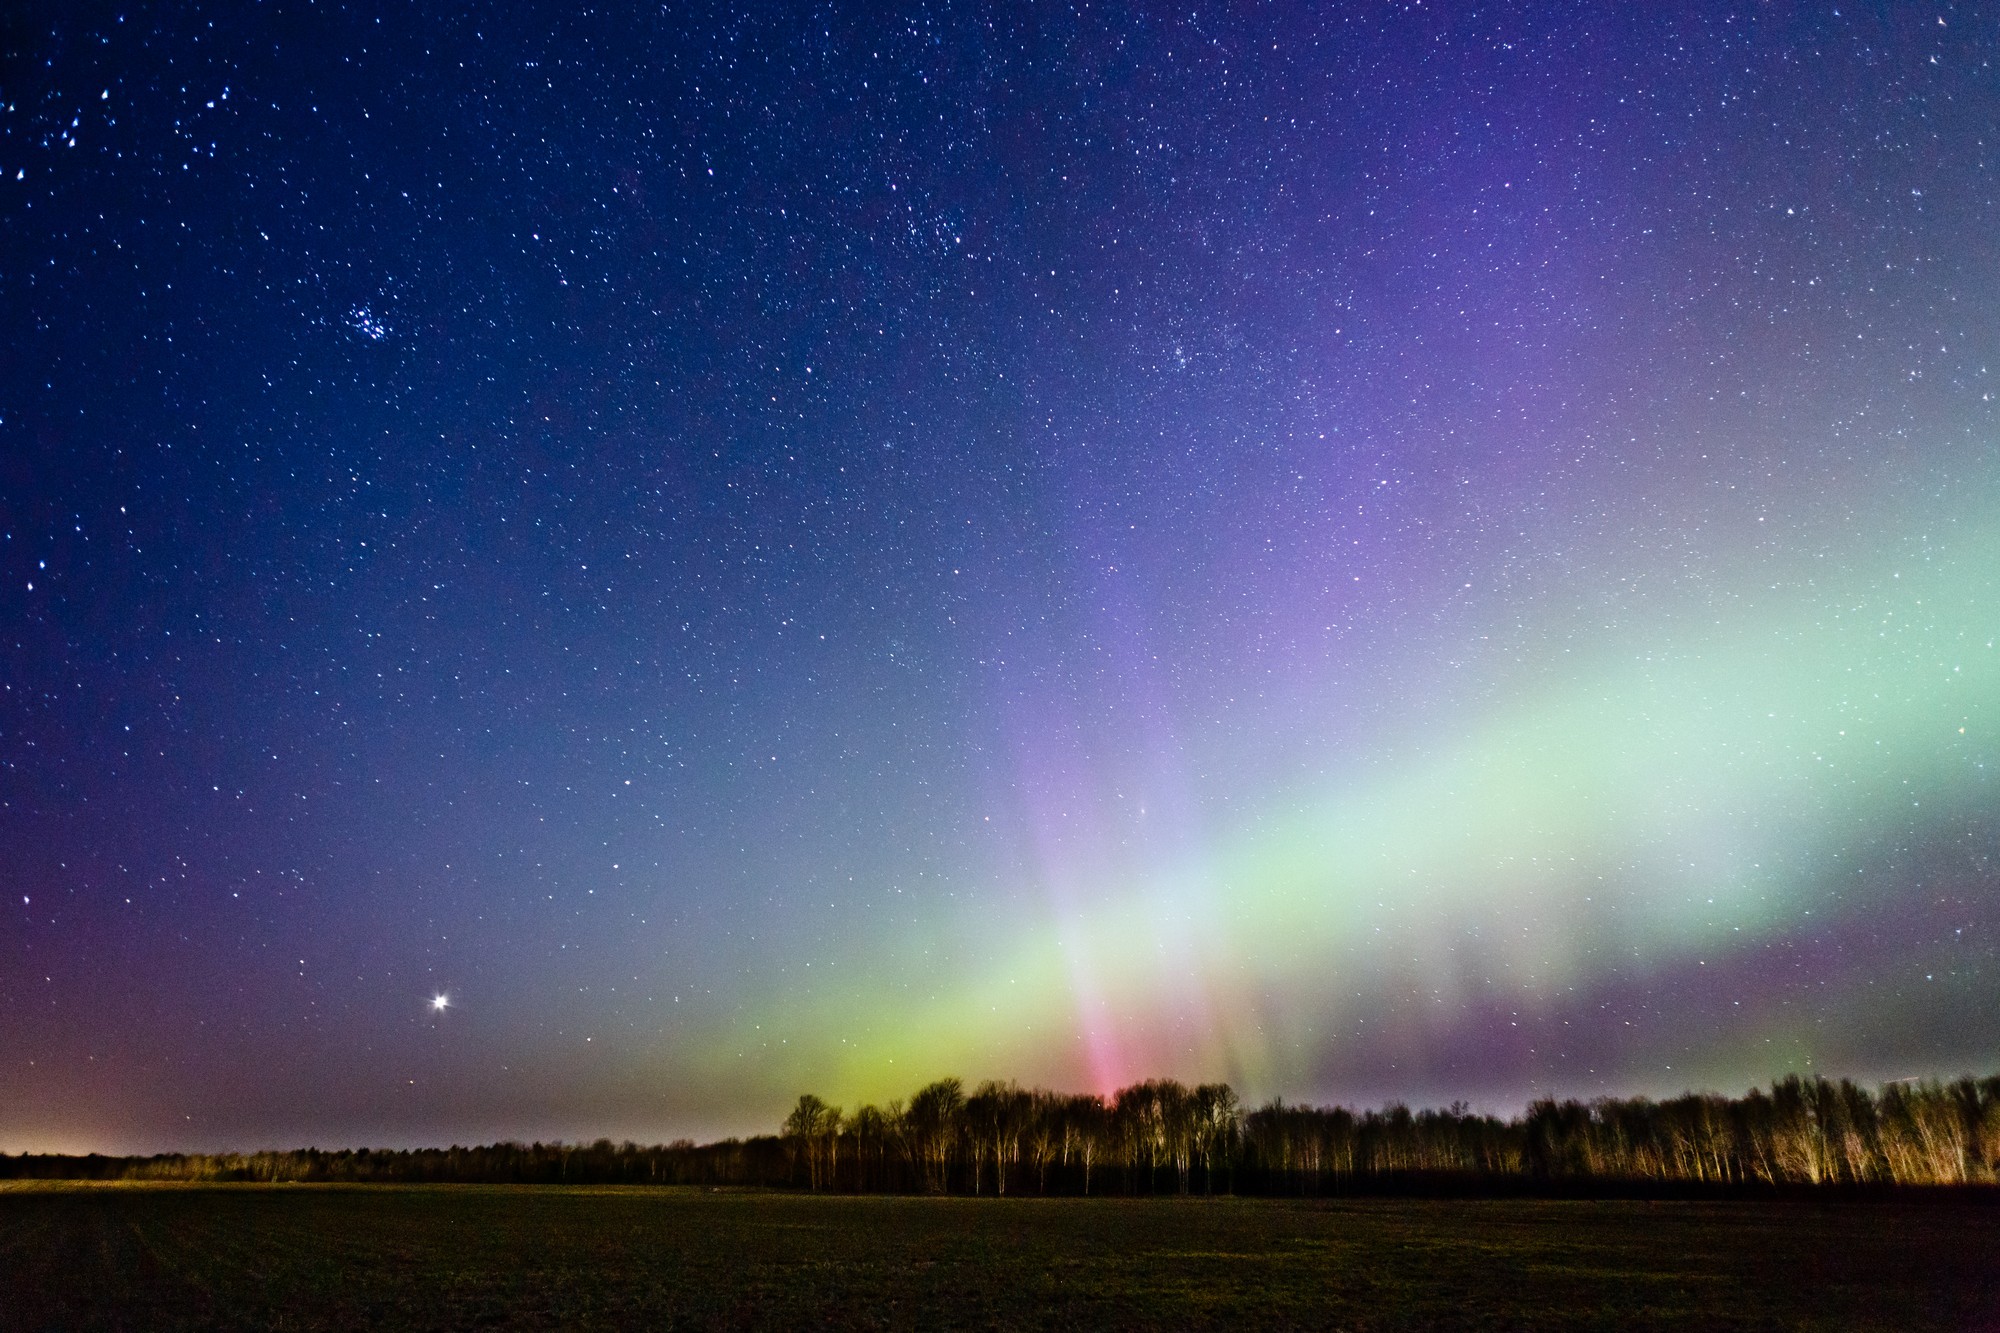 Coming Soon! Catch the Northern Lights Over Alpena